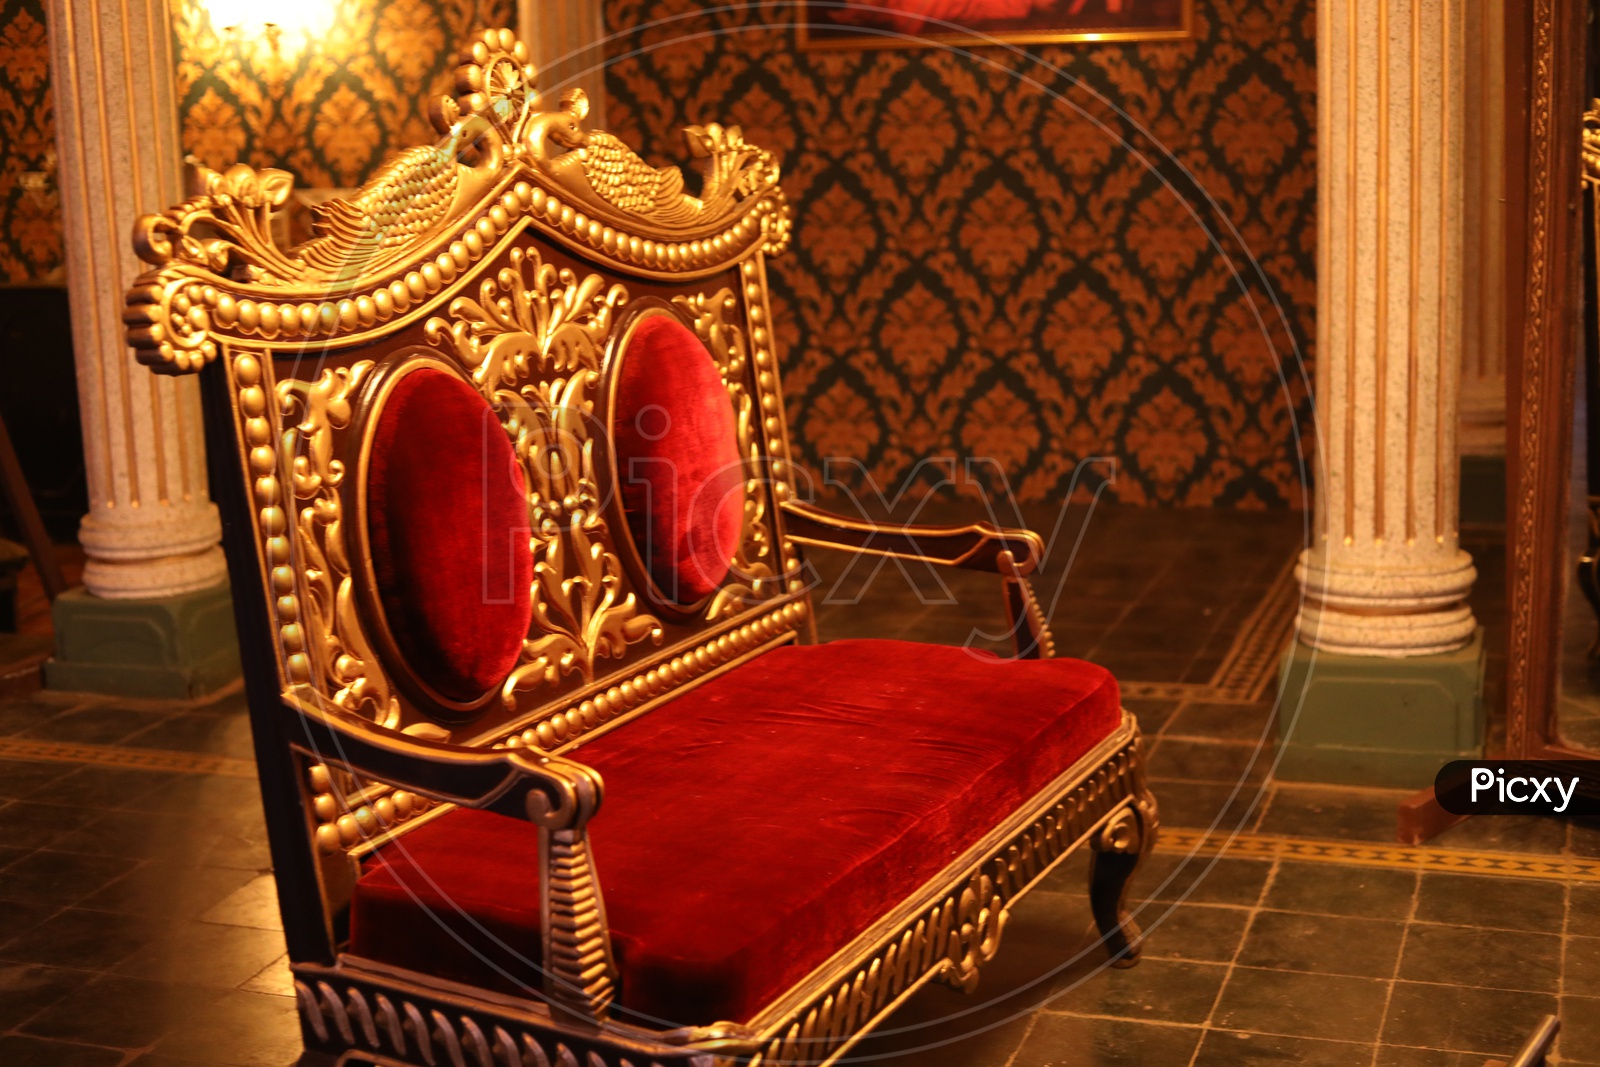 A Royal chair for two people